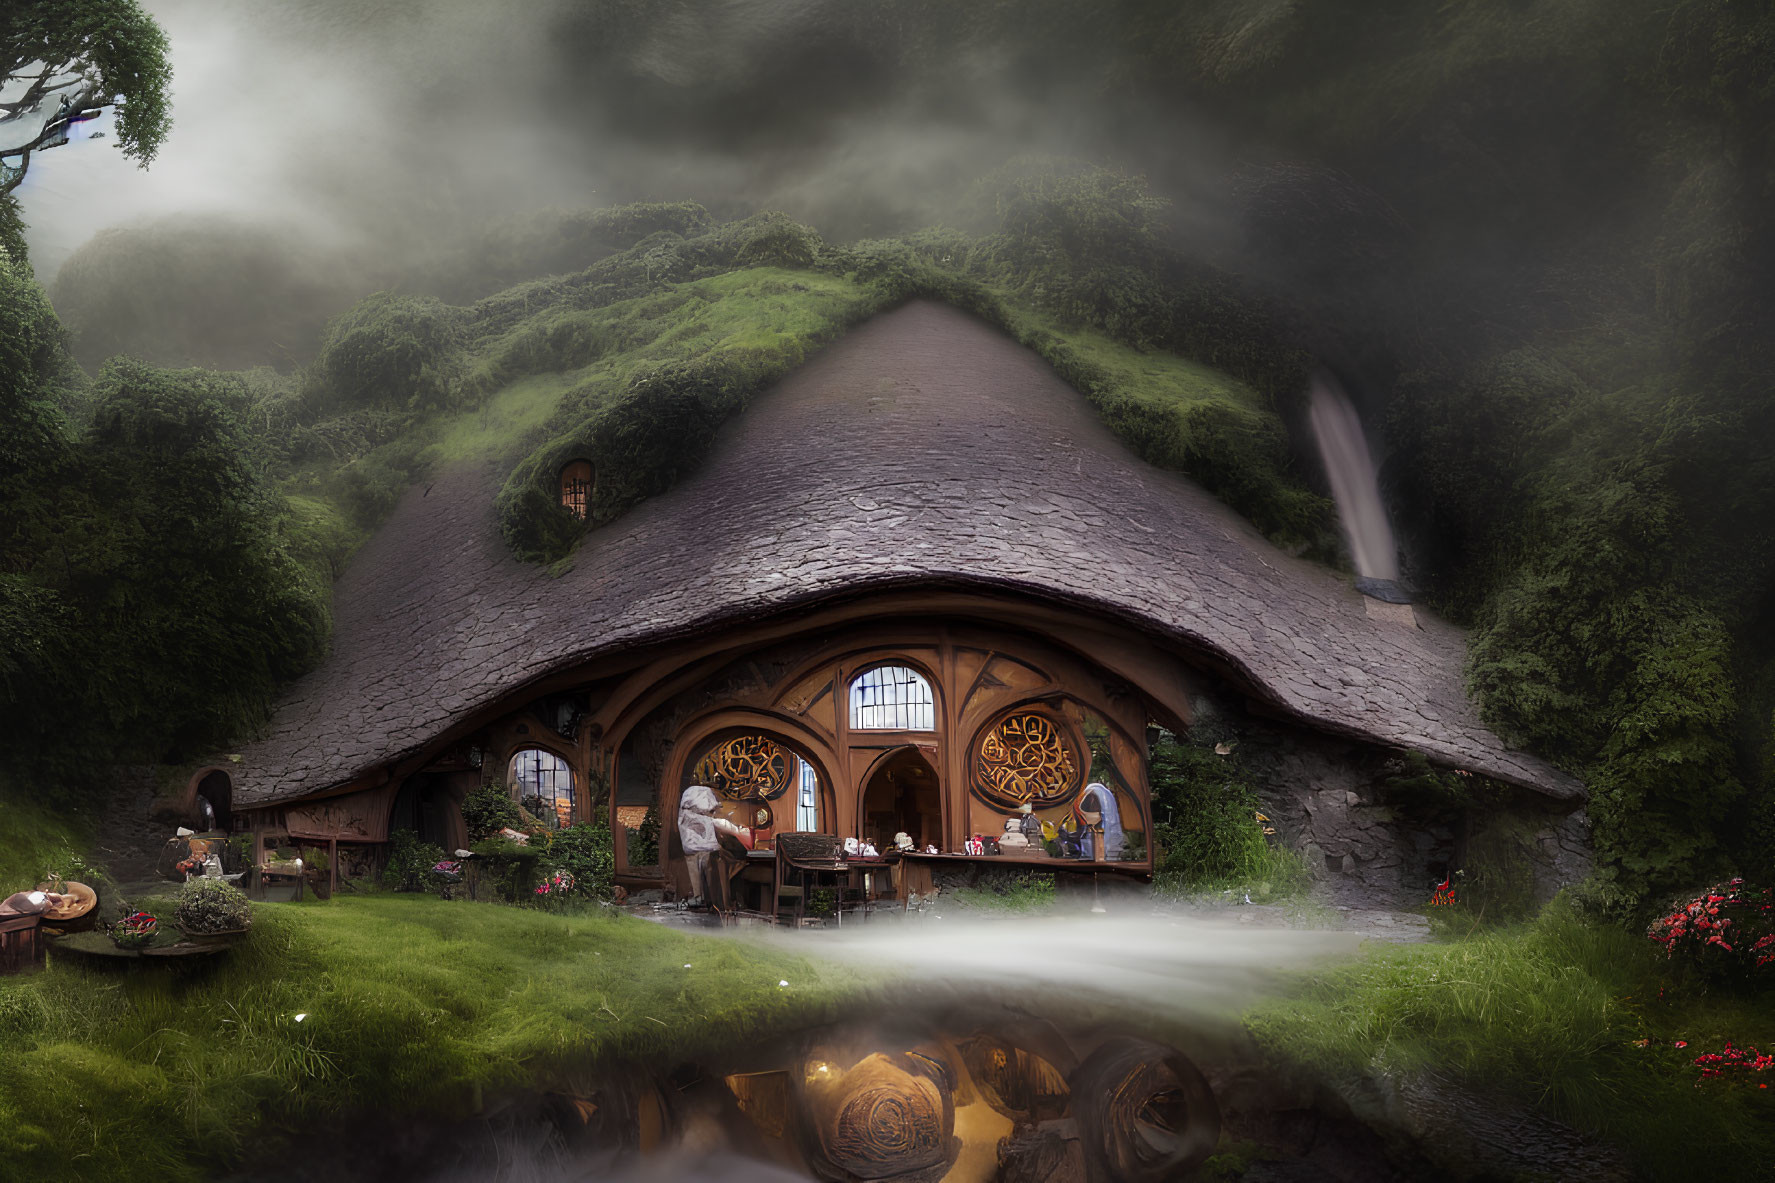 Whimsical cottage with thatched roof in mystical forest